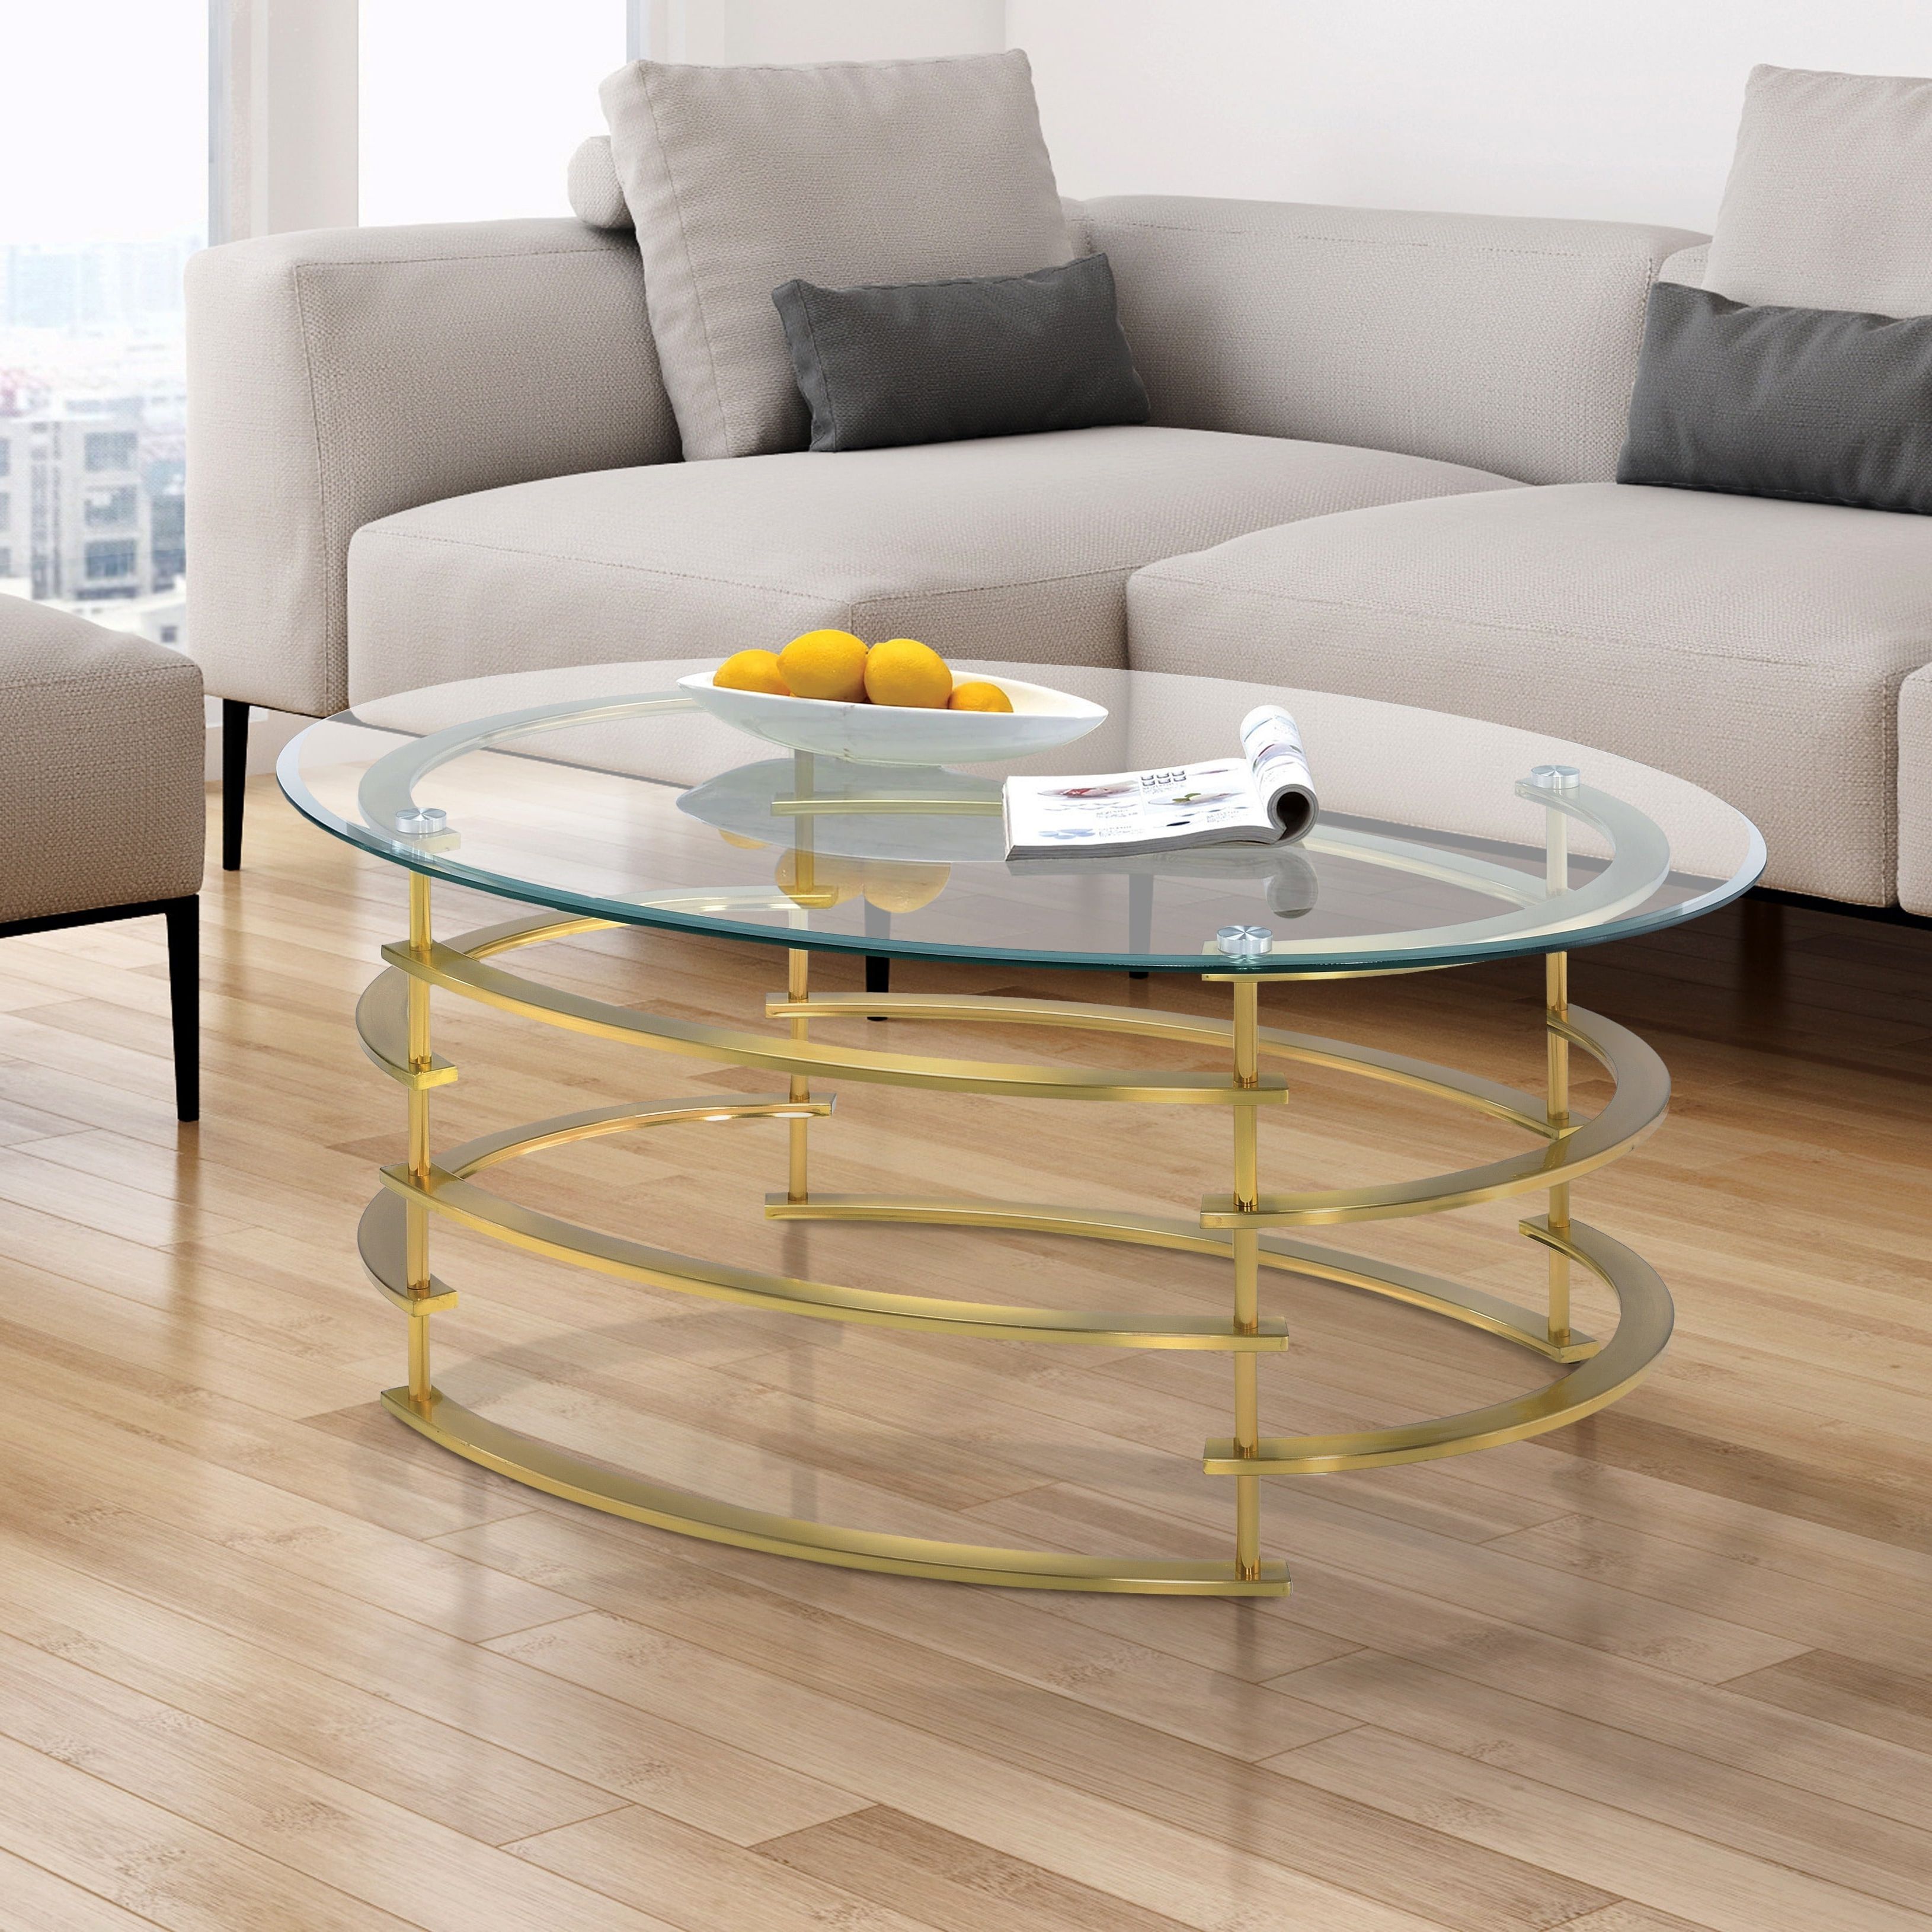 Current Silver Orchid Ipsen Contemporary Glass Top Coffee Tables Intended For Silver Orchid Marcello Contemporary Glass Top Coffee Table (View 2 of 20)